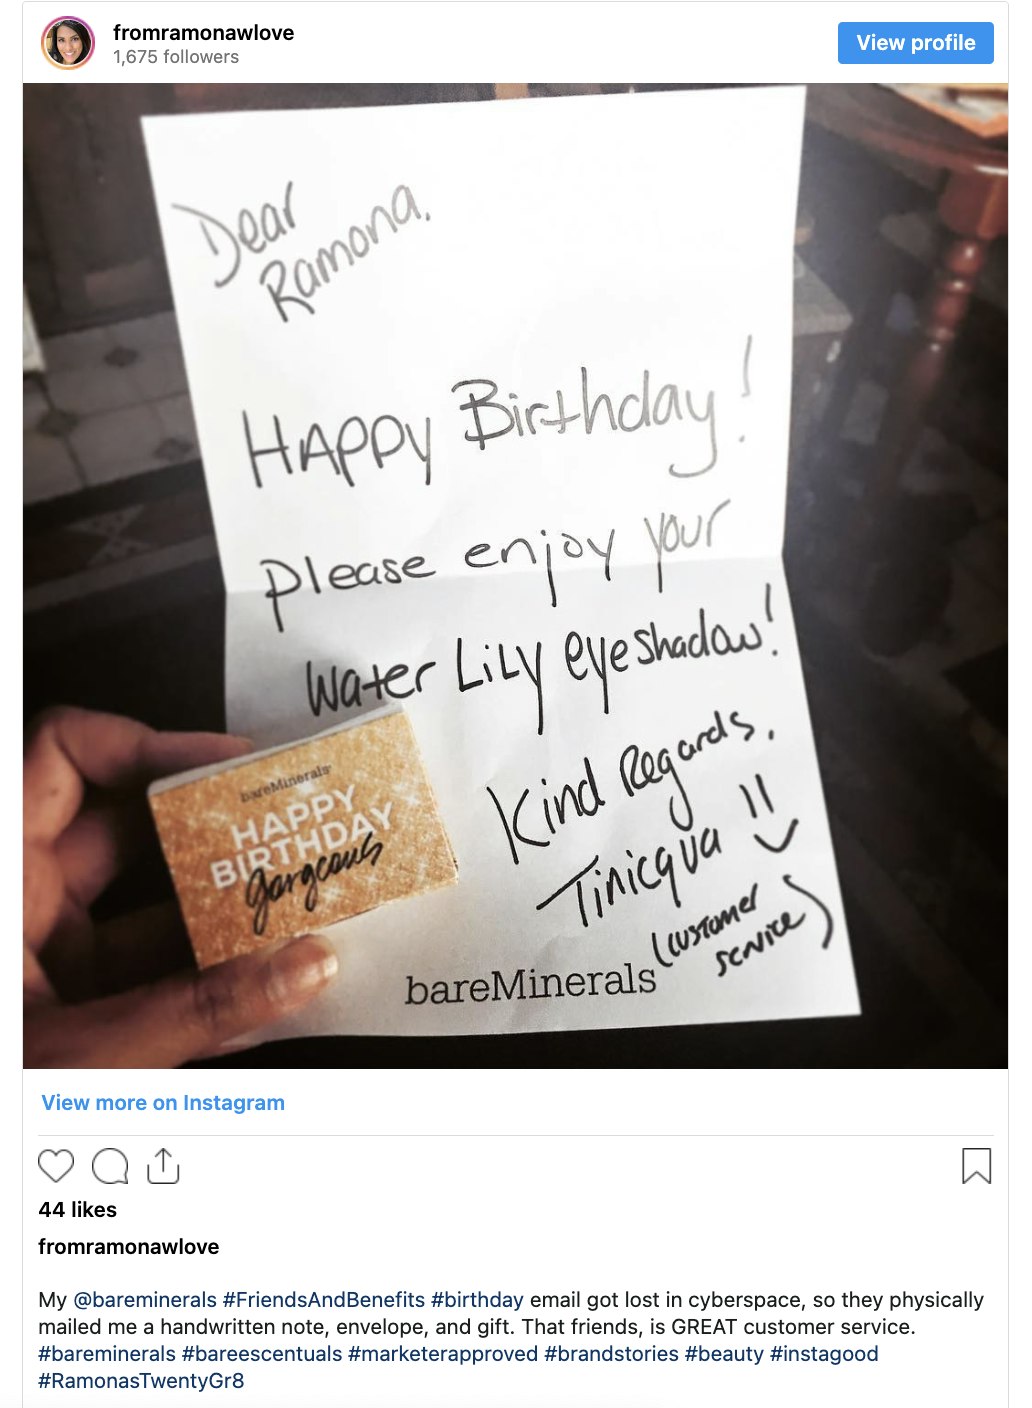 17 Great Customer Service Examples to Inspire You (bareMinerals)